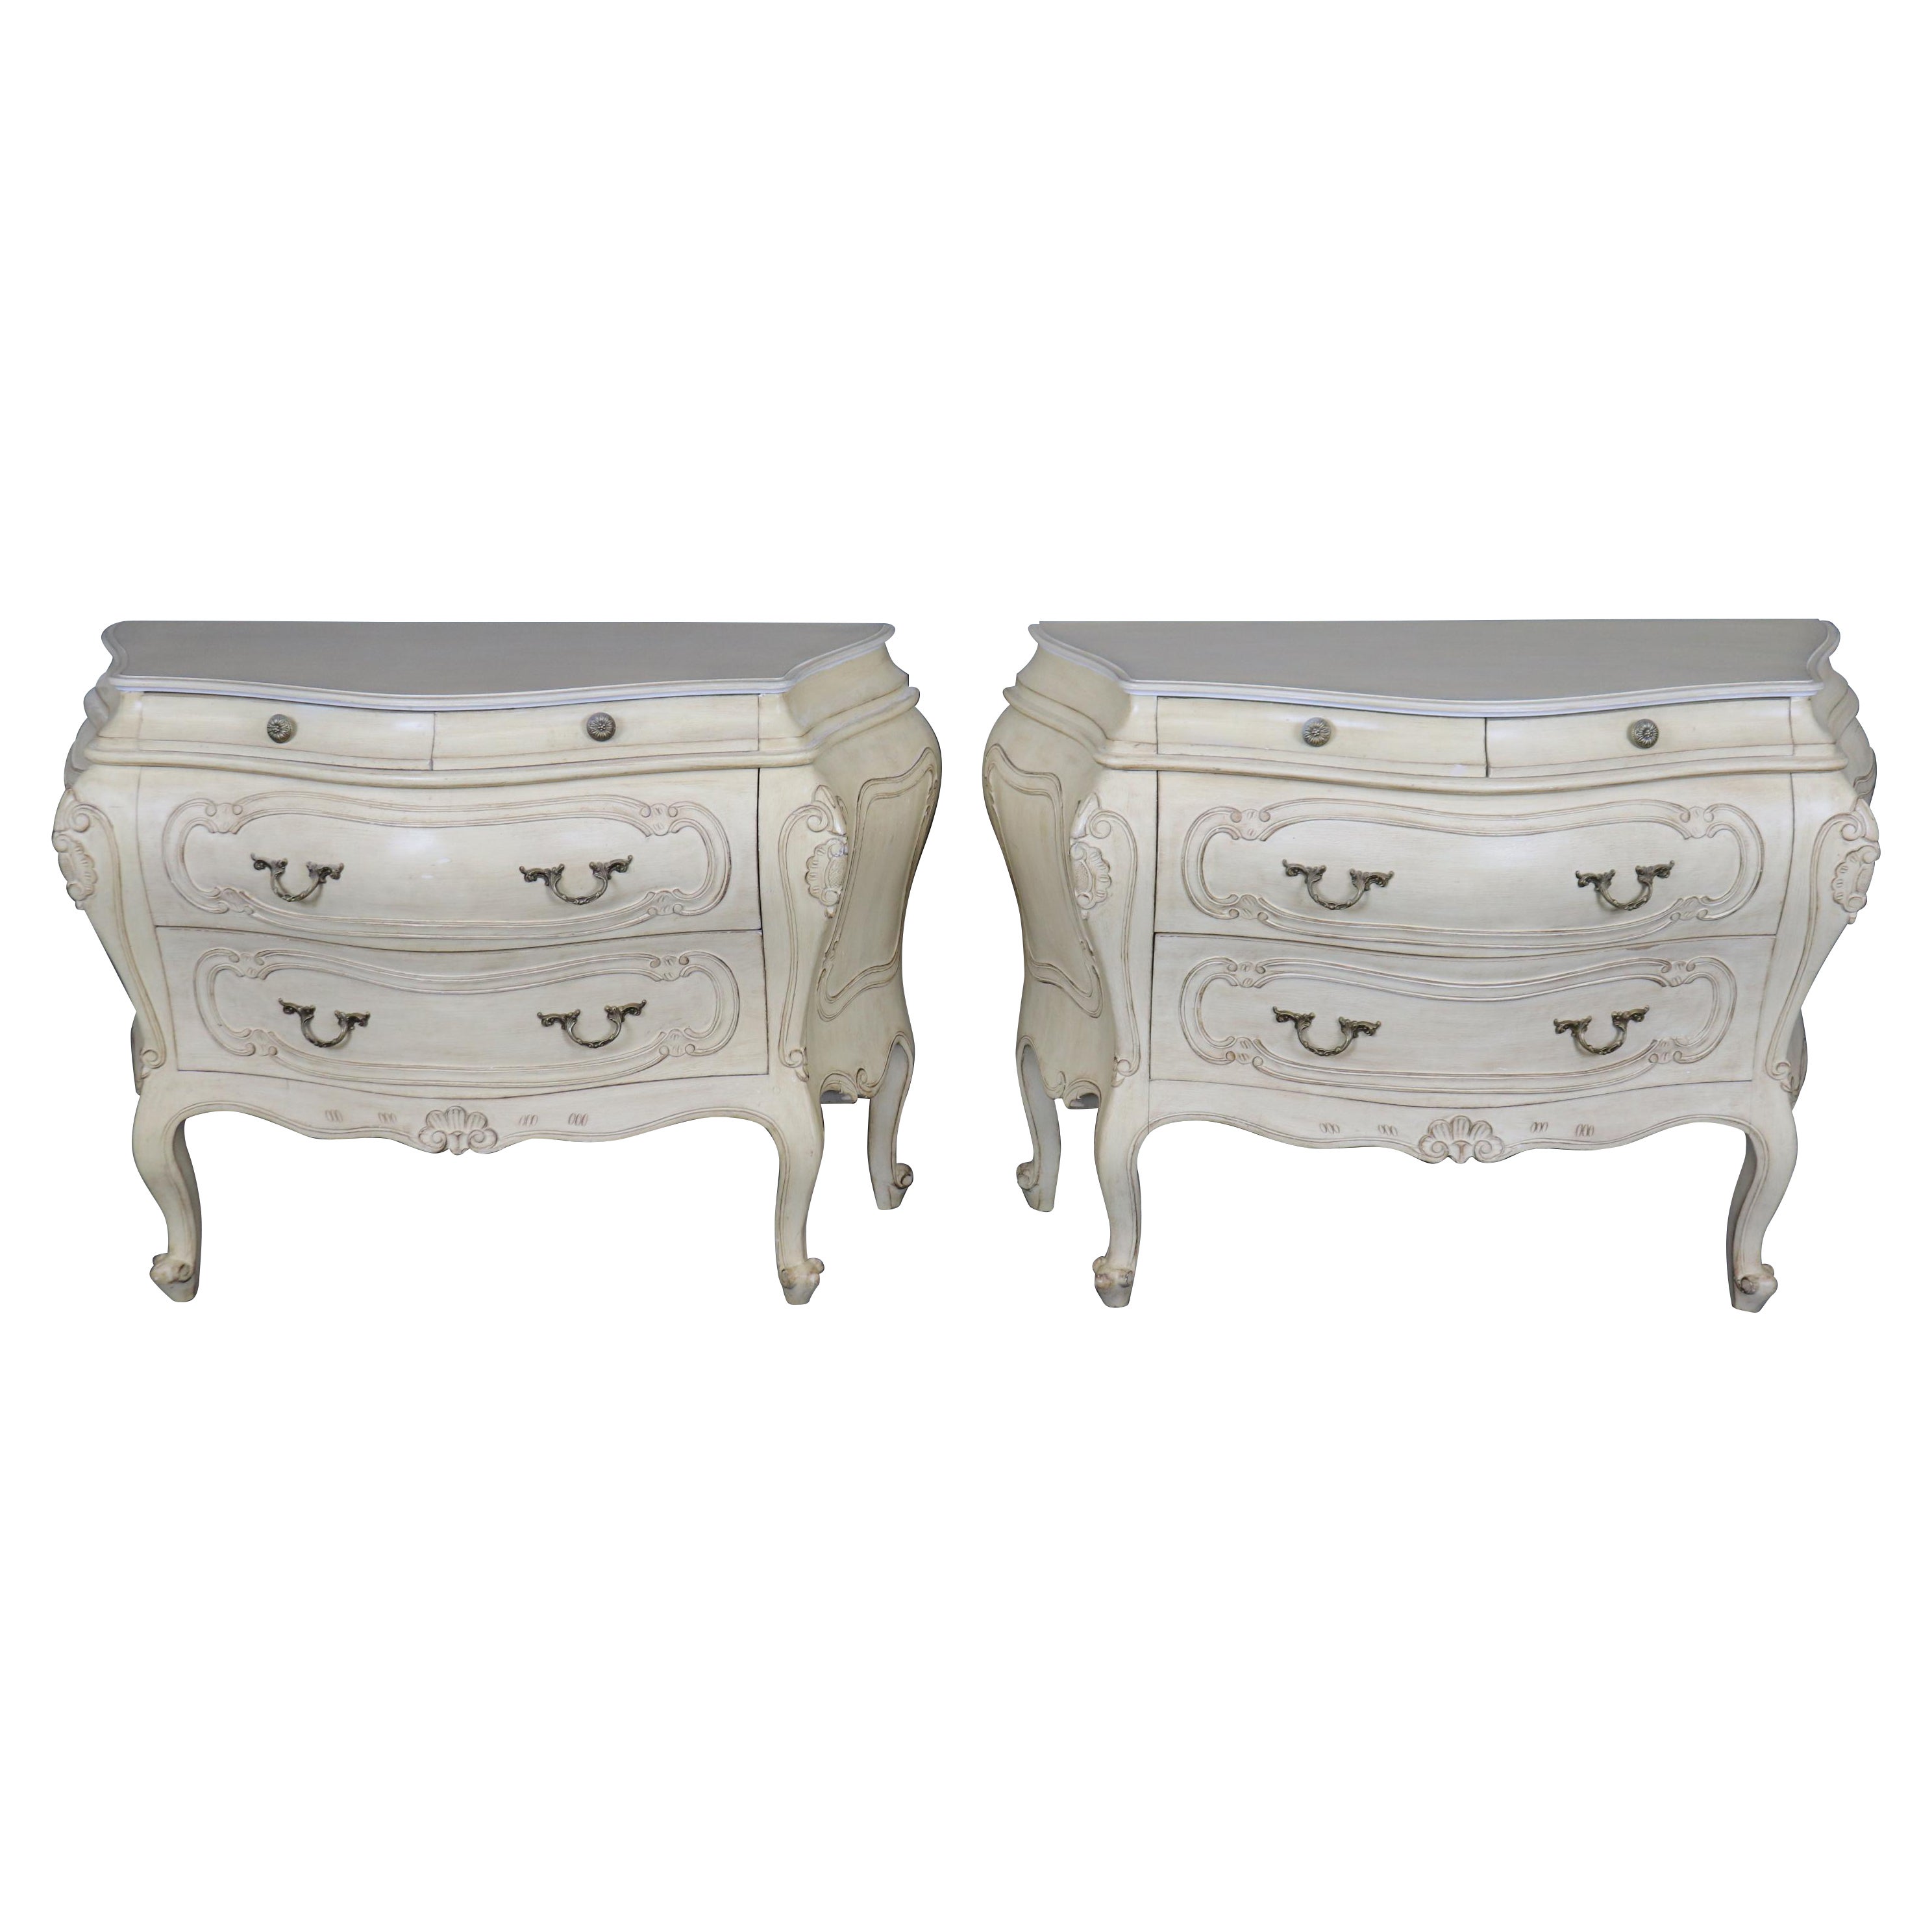 Pair of Fantastic French Rococo Bombe Distressed Off-white Painted Commodes